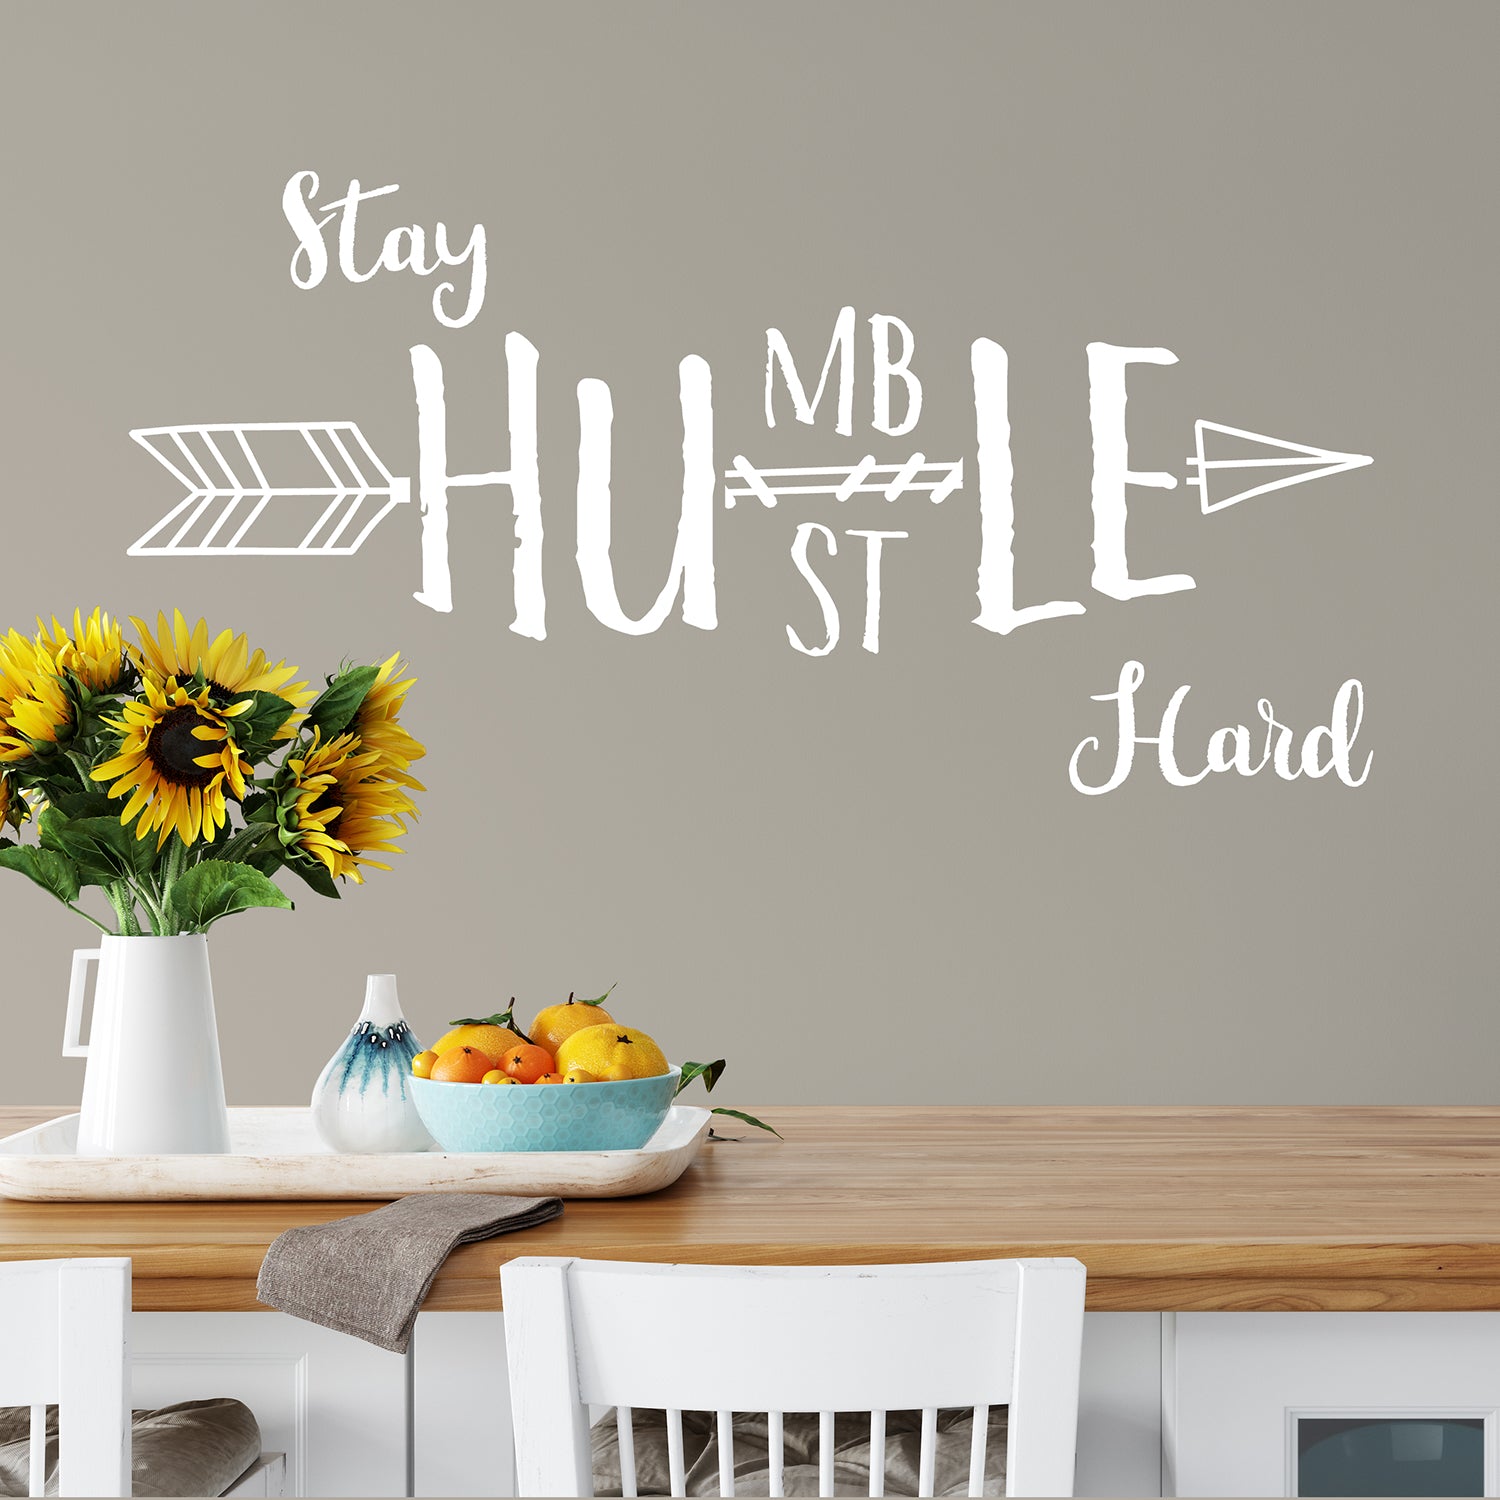 Stay humble hustle hard | Wall quote-Wall quote-Adnil Creations